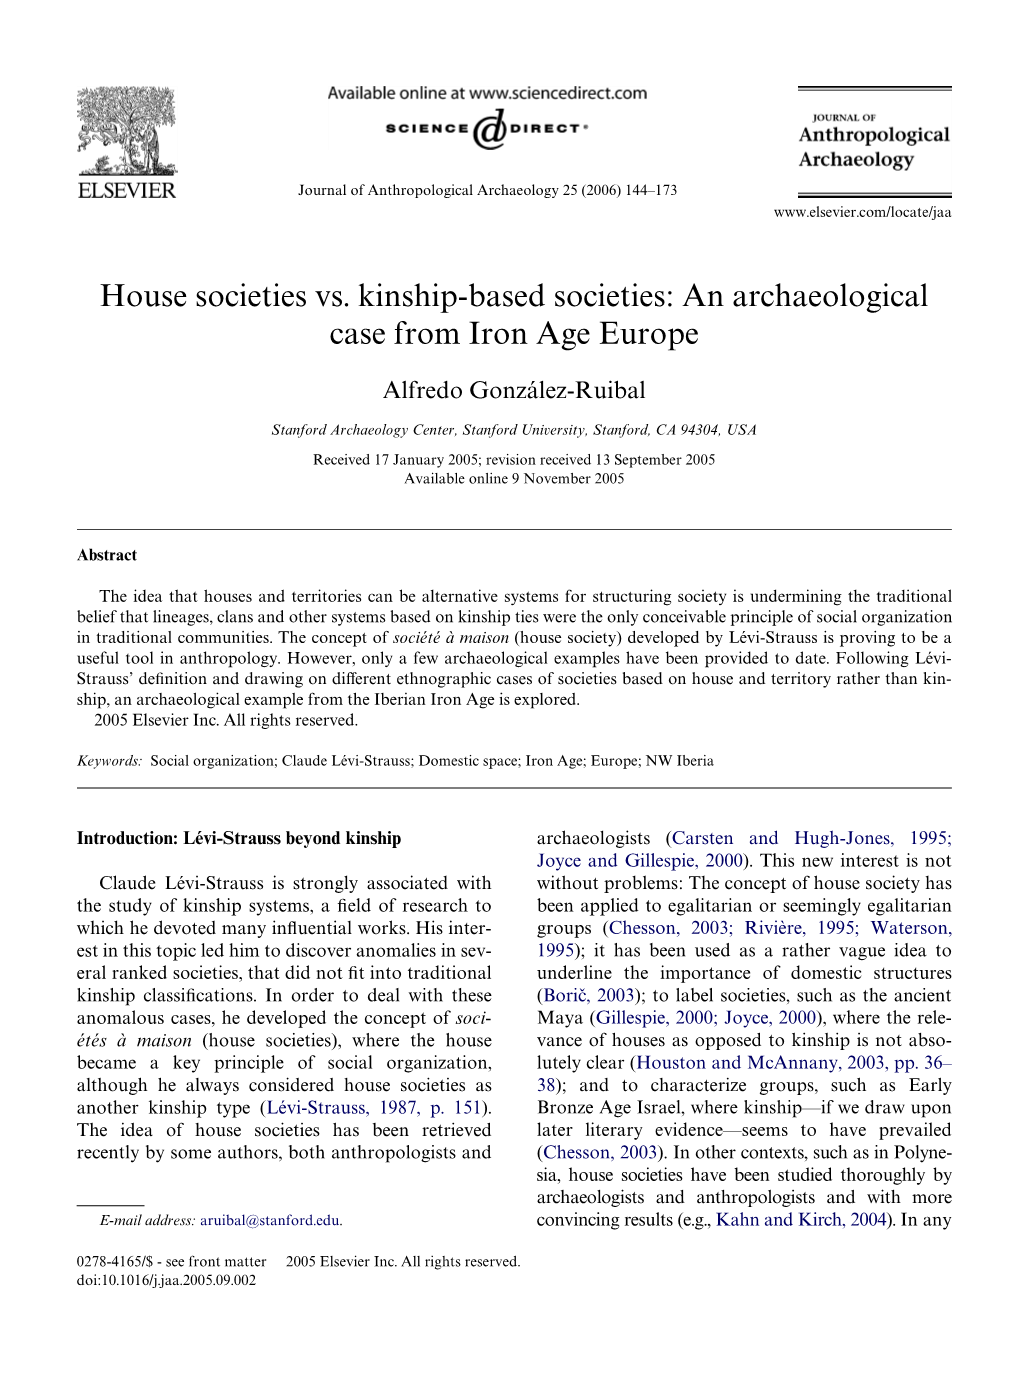 House Societies Vs. Kinship-Based Societies: an Archaeological Case from Iron Age Europe